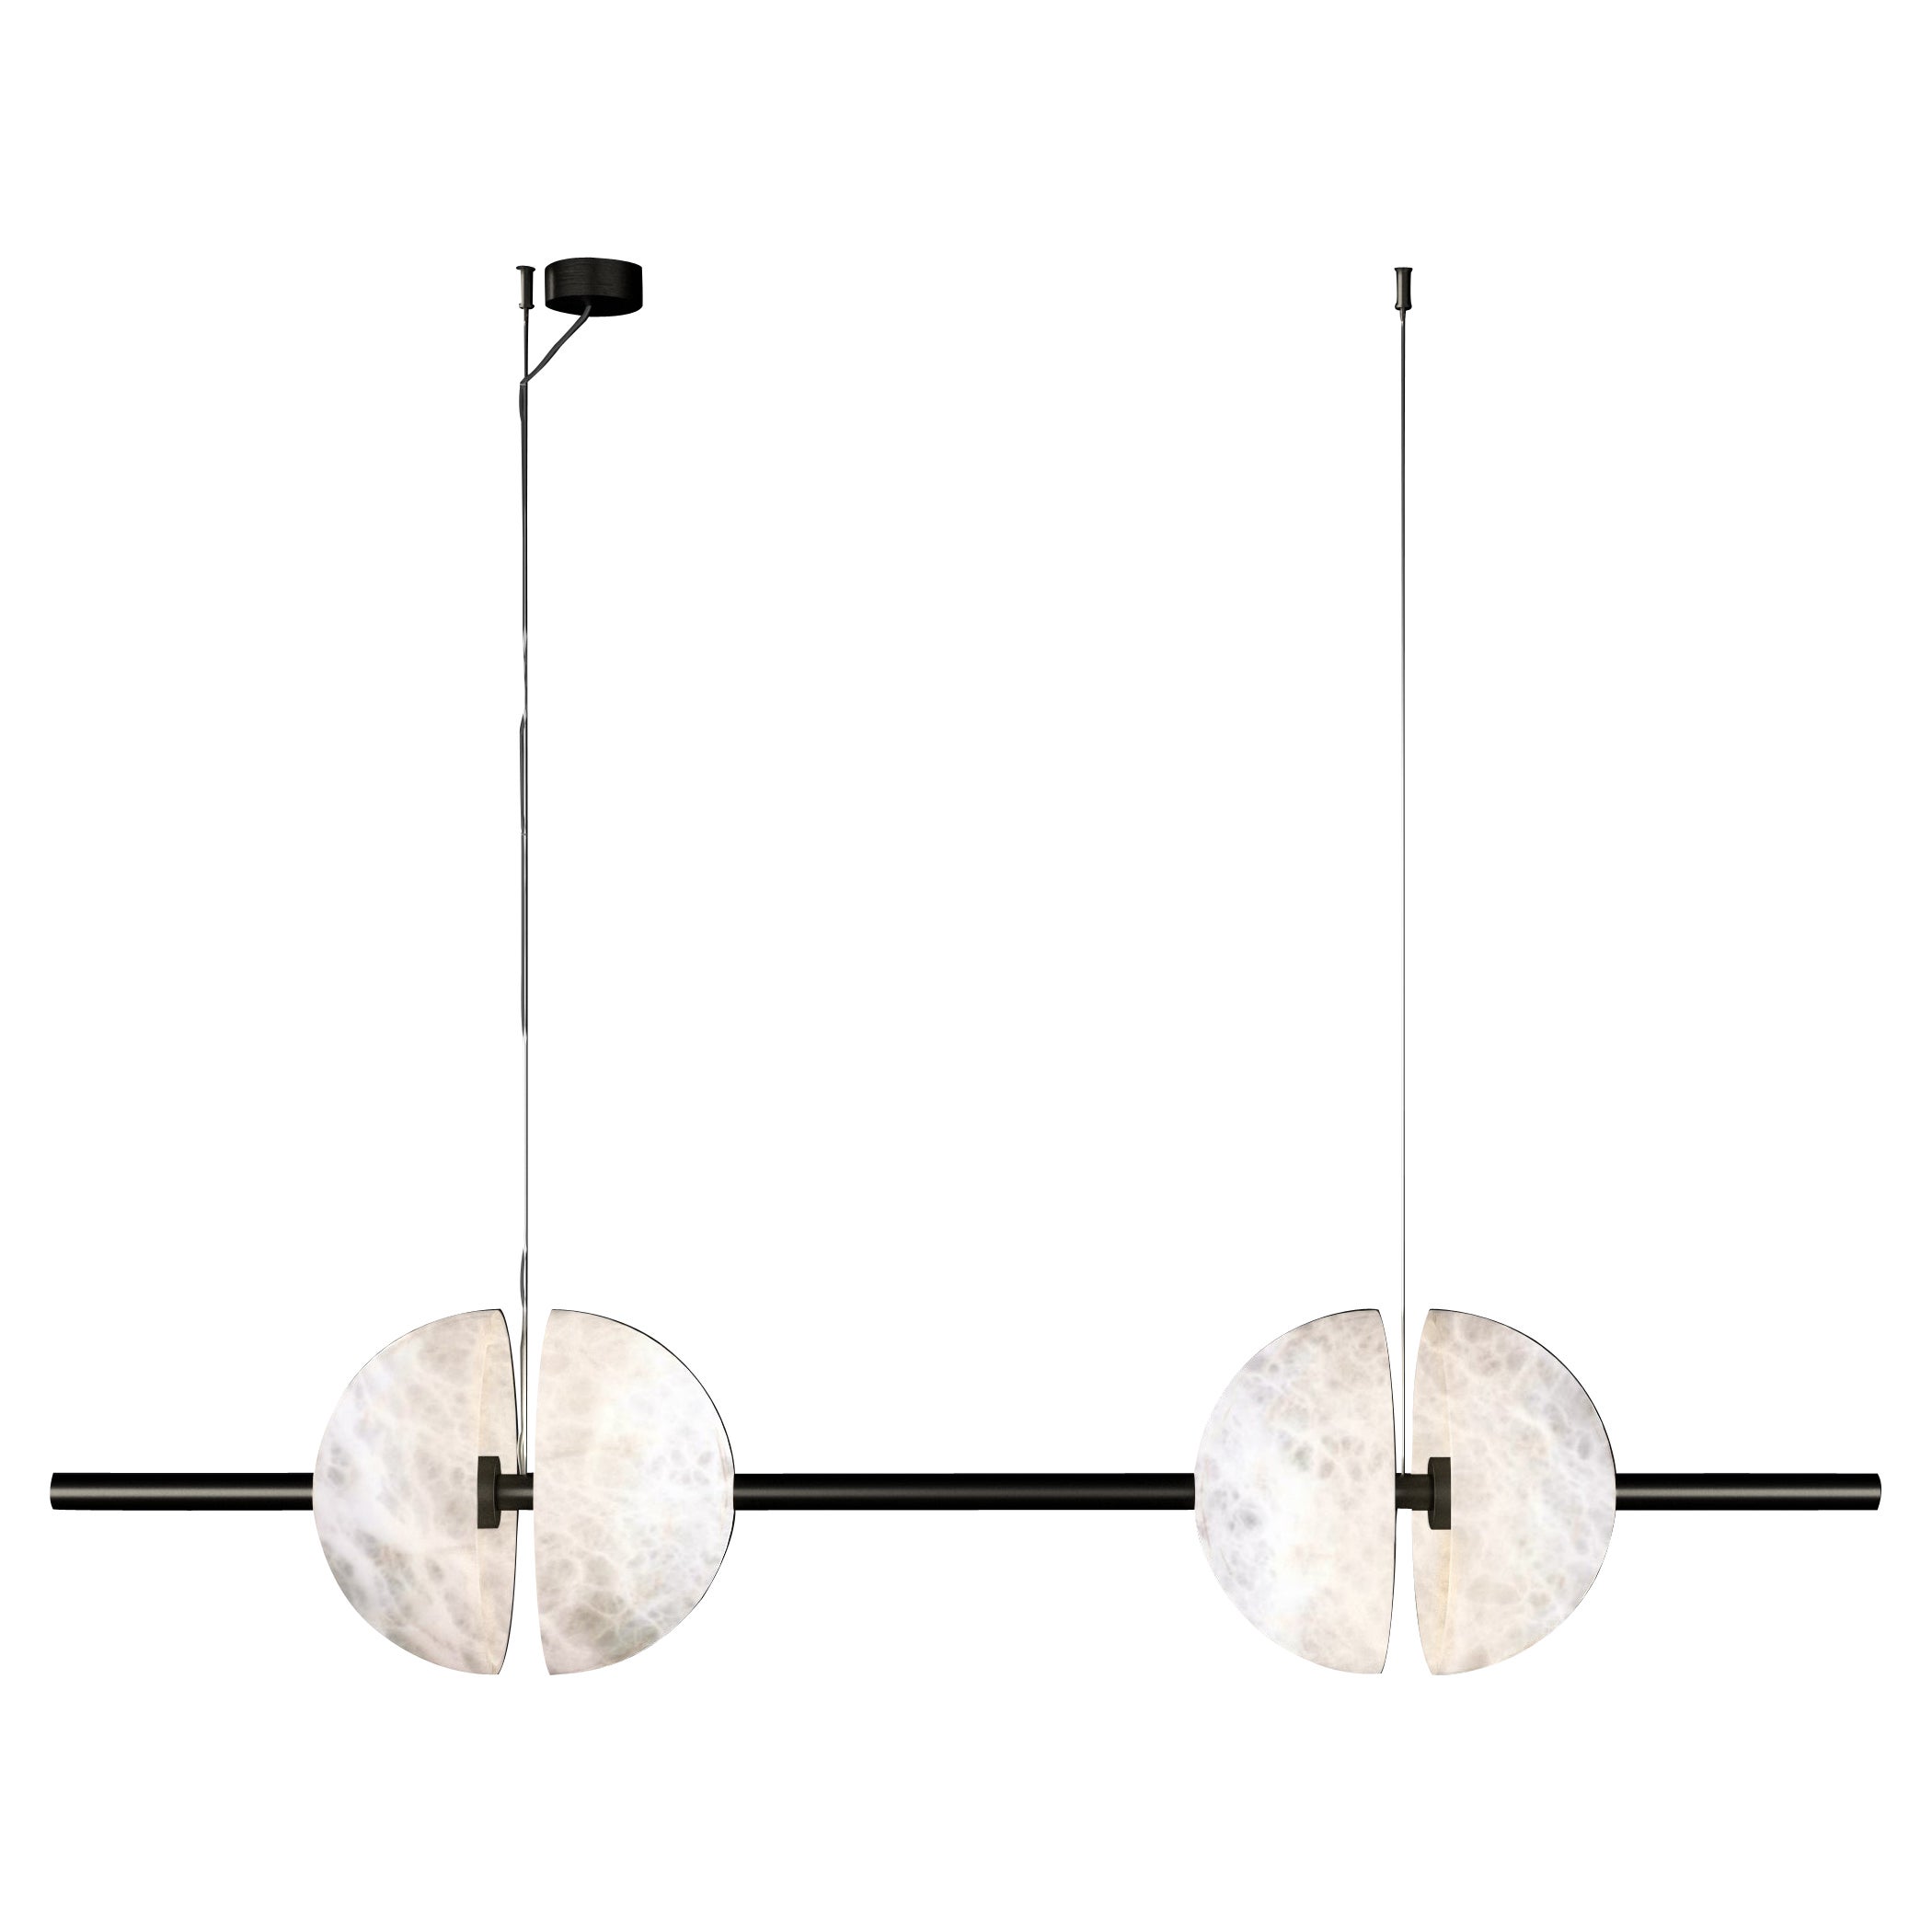 Ermes Brushed Black Metal And Alabaster Pendant Light 1 by Alabastro Italiano For Sale